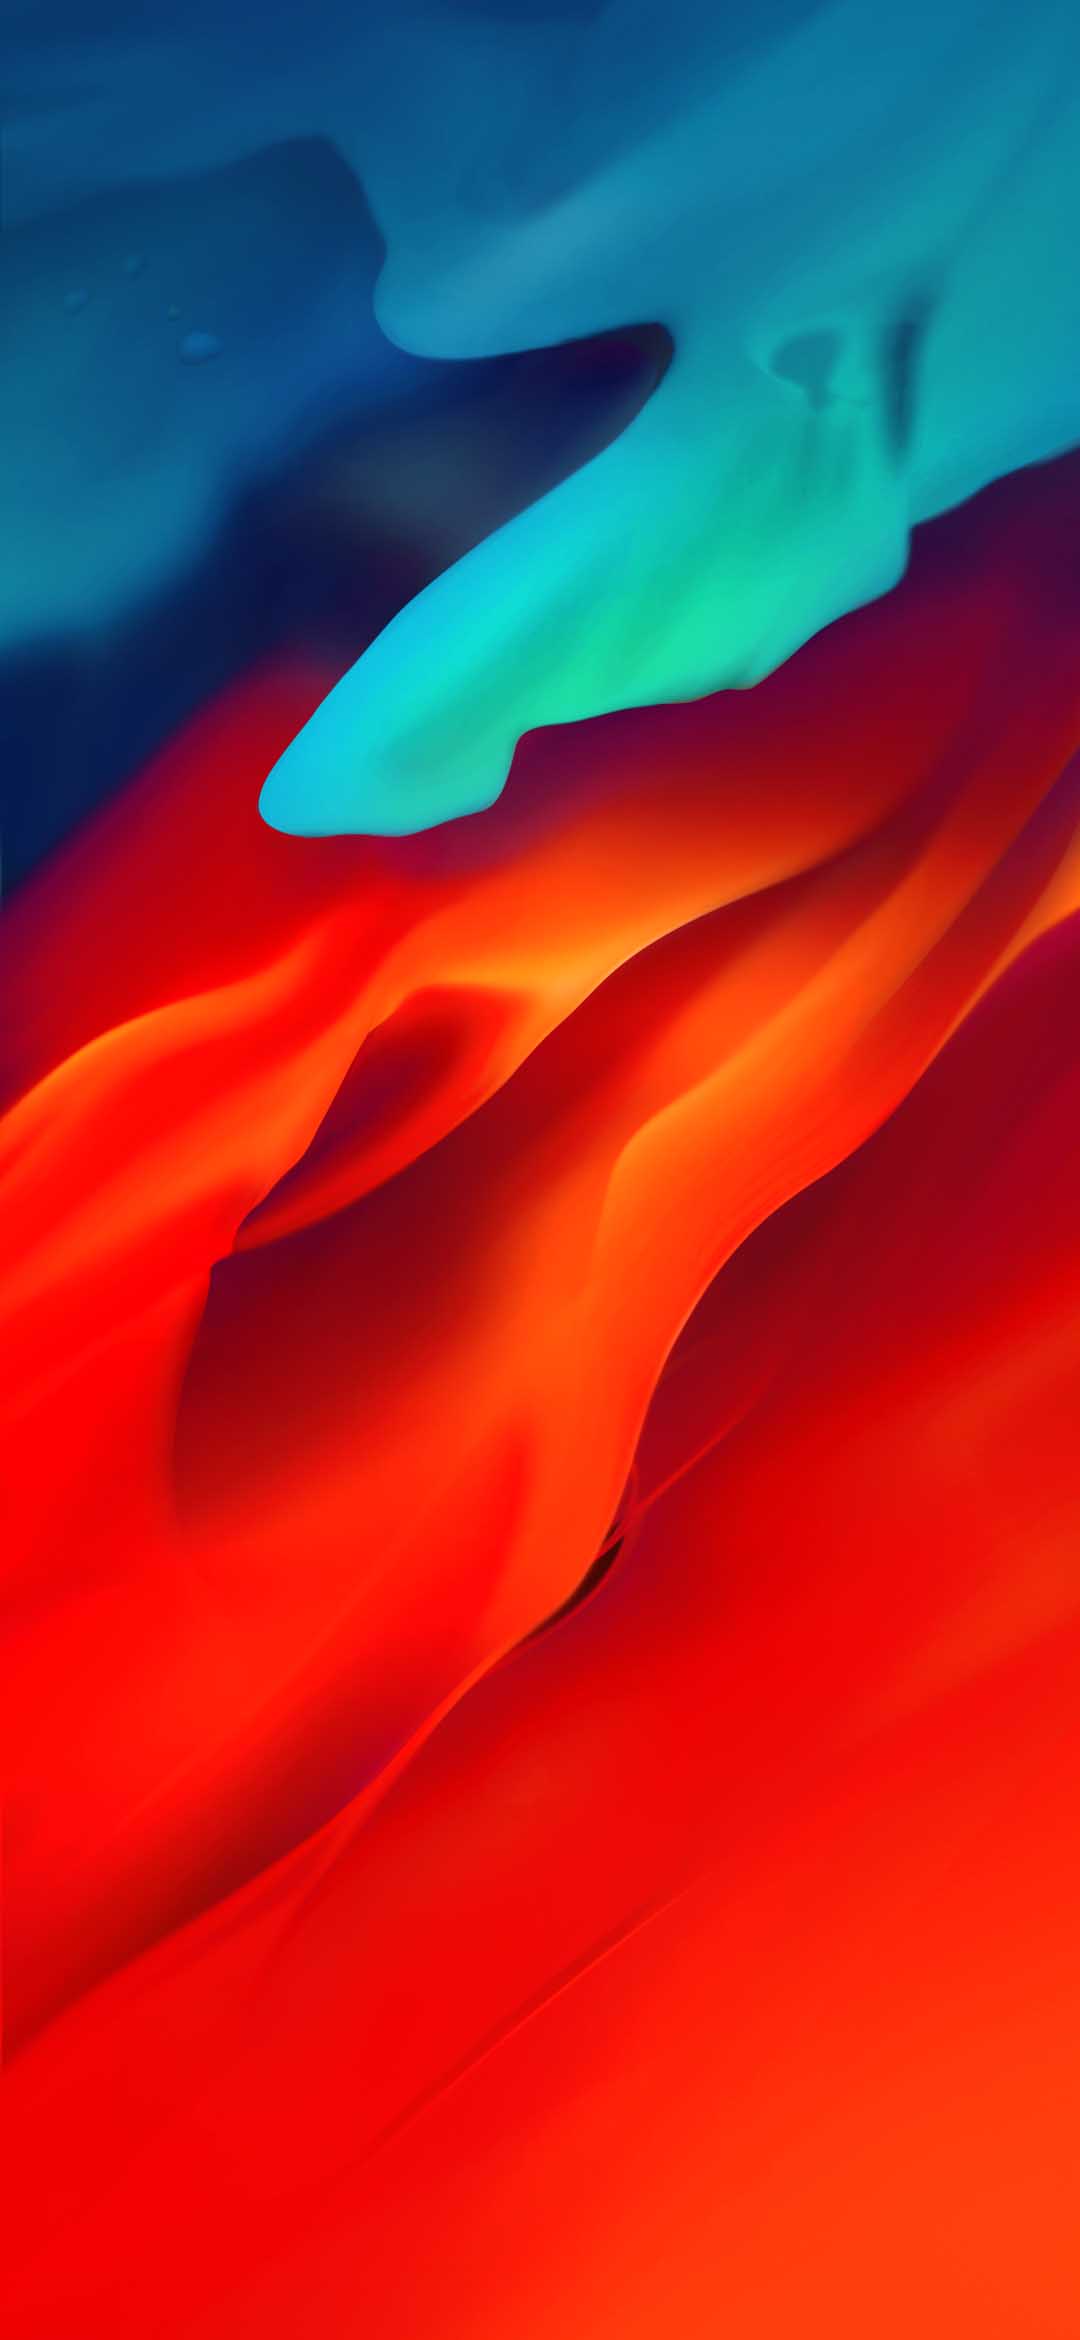 The Lenovo Z6 Pro Wallpapers Pack, Keep In Mind Though - Lenovo Z6 Pro , HD Wallpaper & Backgrounds